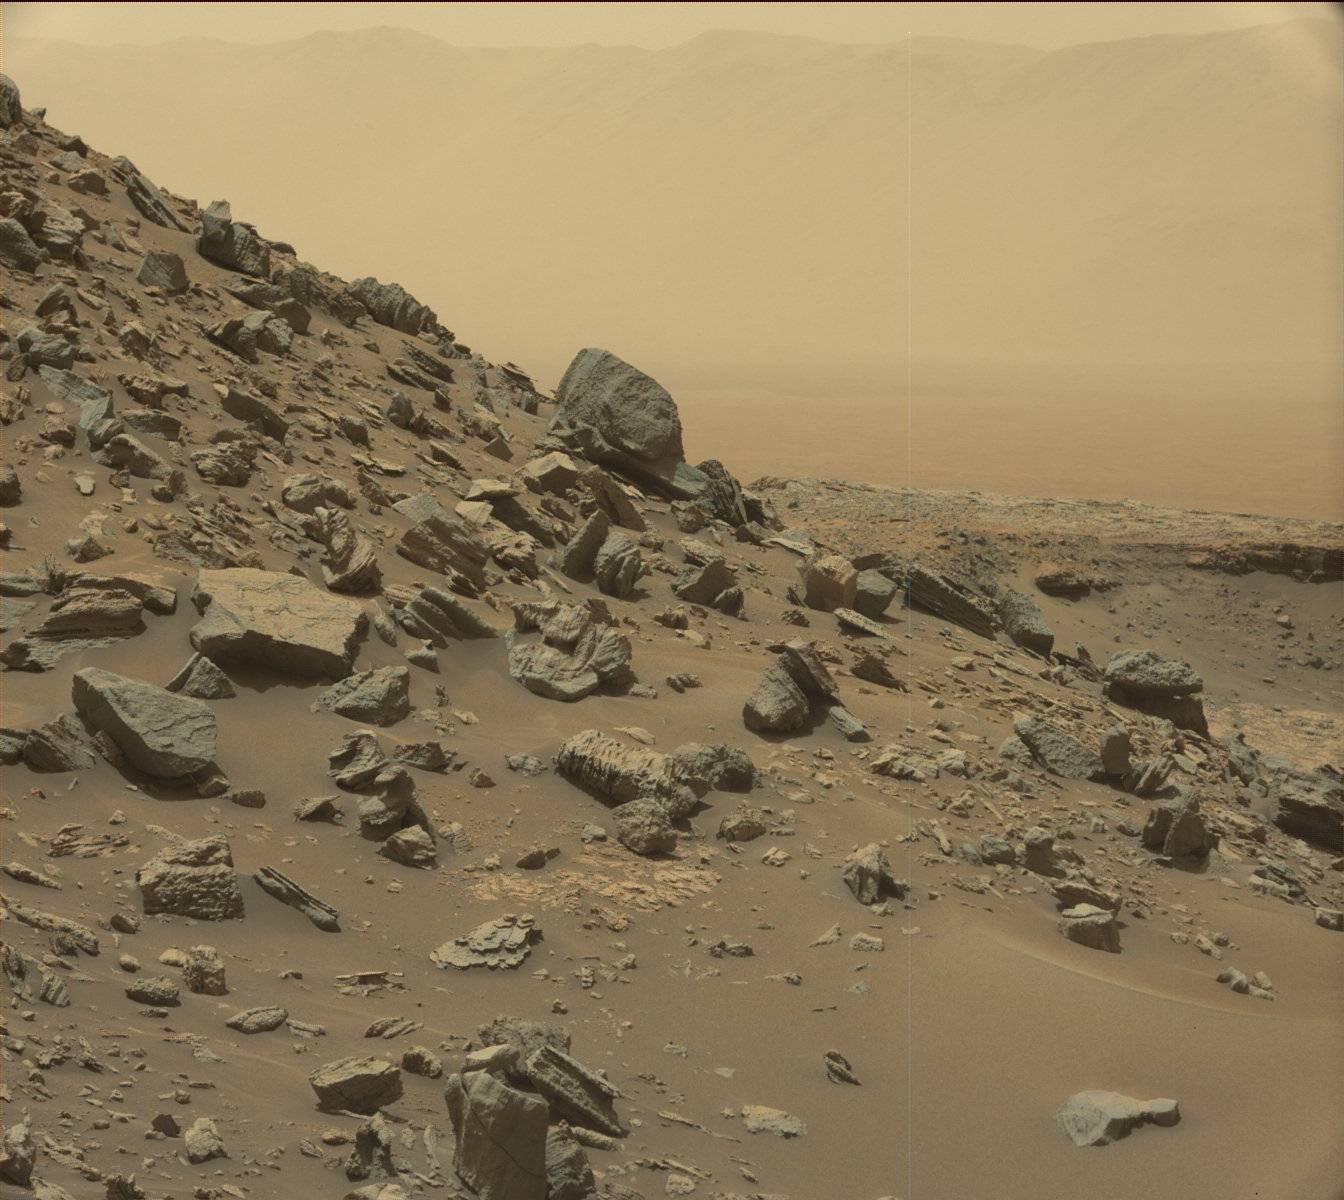 The rim of Gale Crater is visible in the distance, through the dusty haze, in this Curiosity view of a sloping hillside on Mount Sharp.